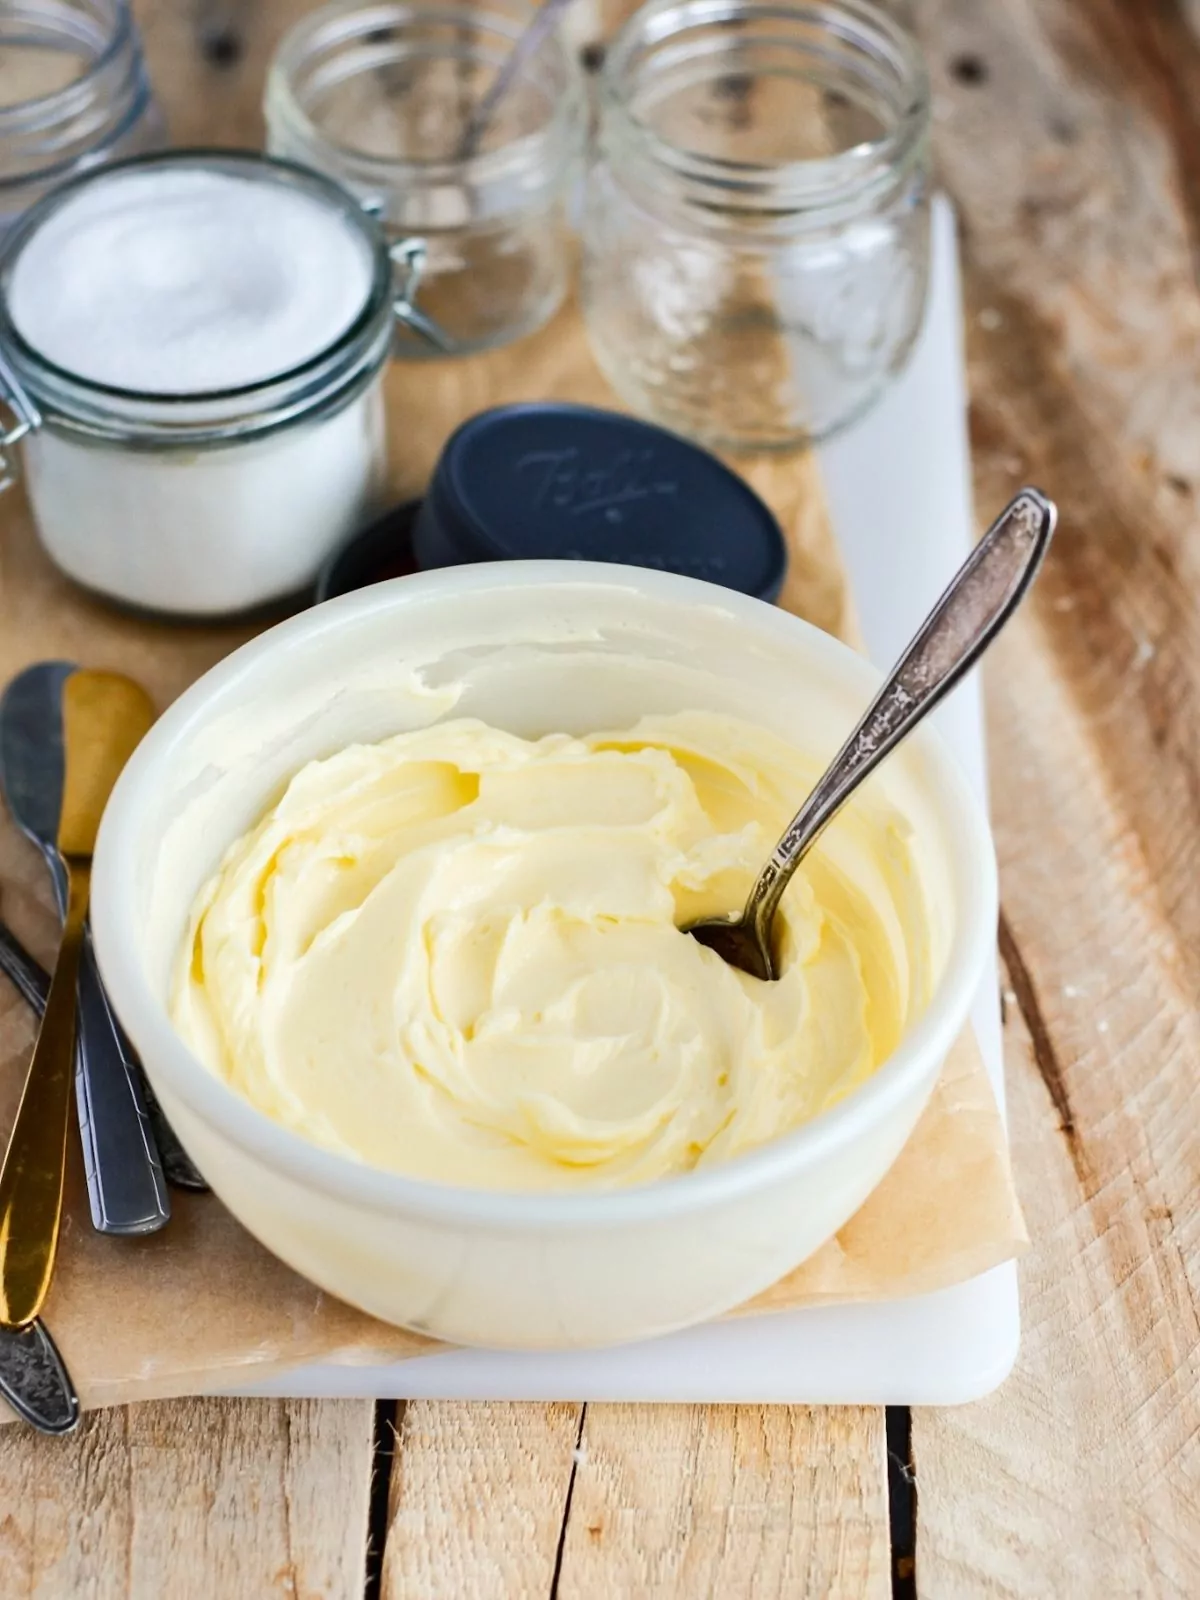 creamy butter in white bowl.